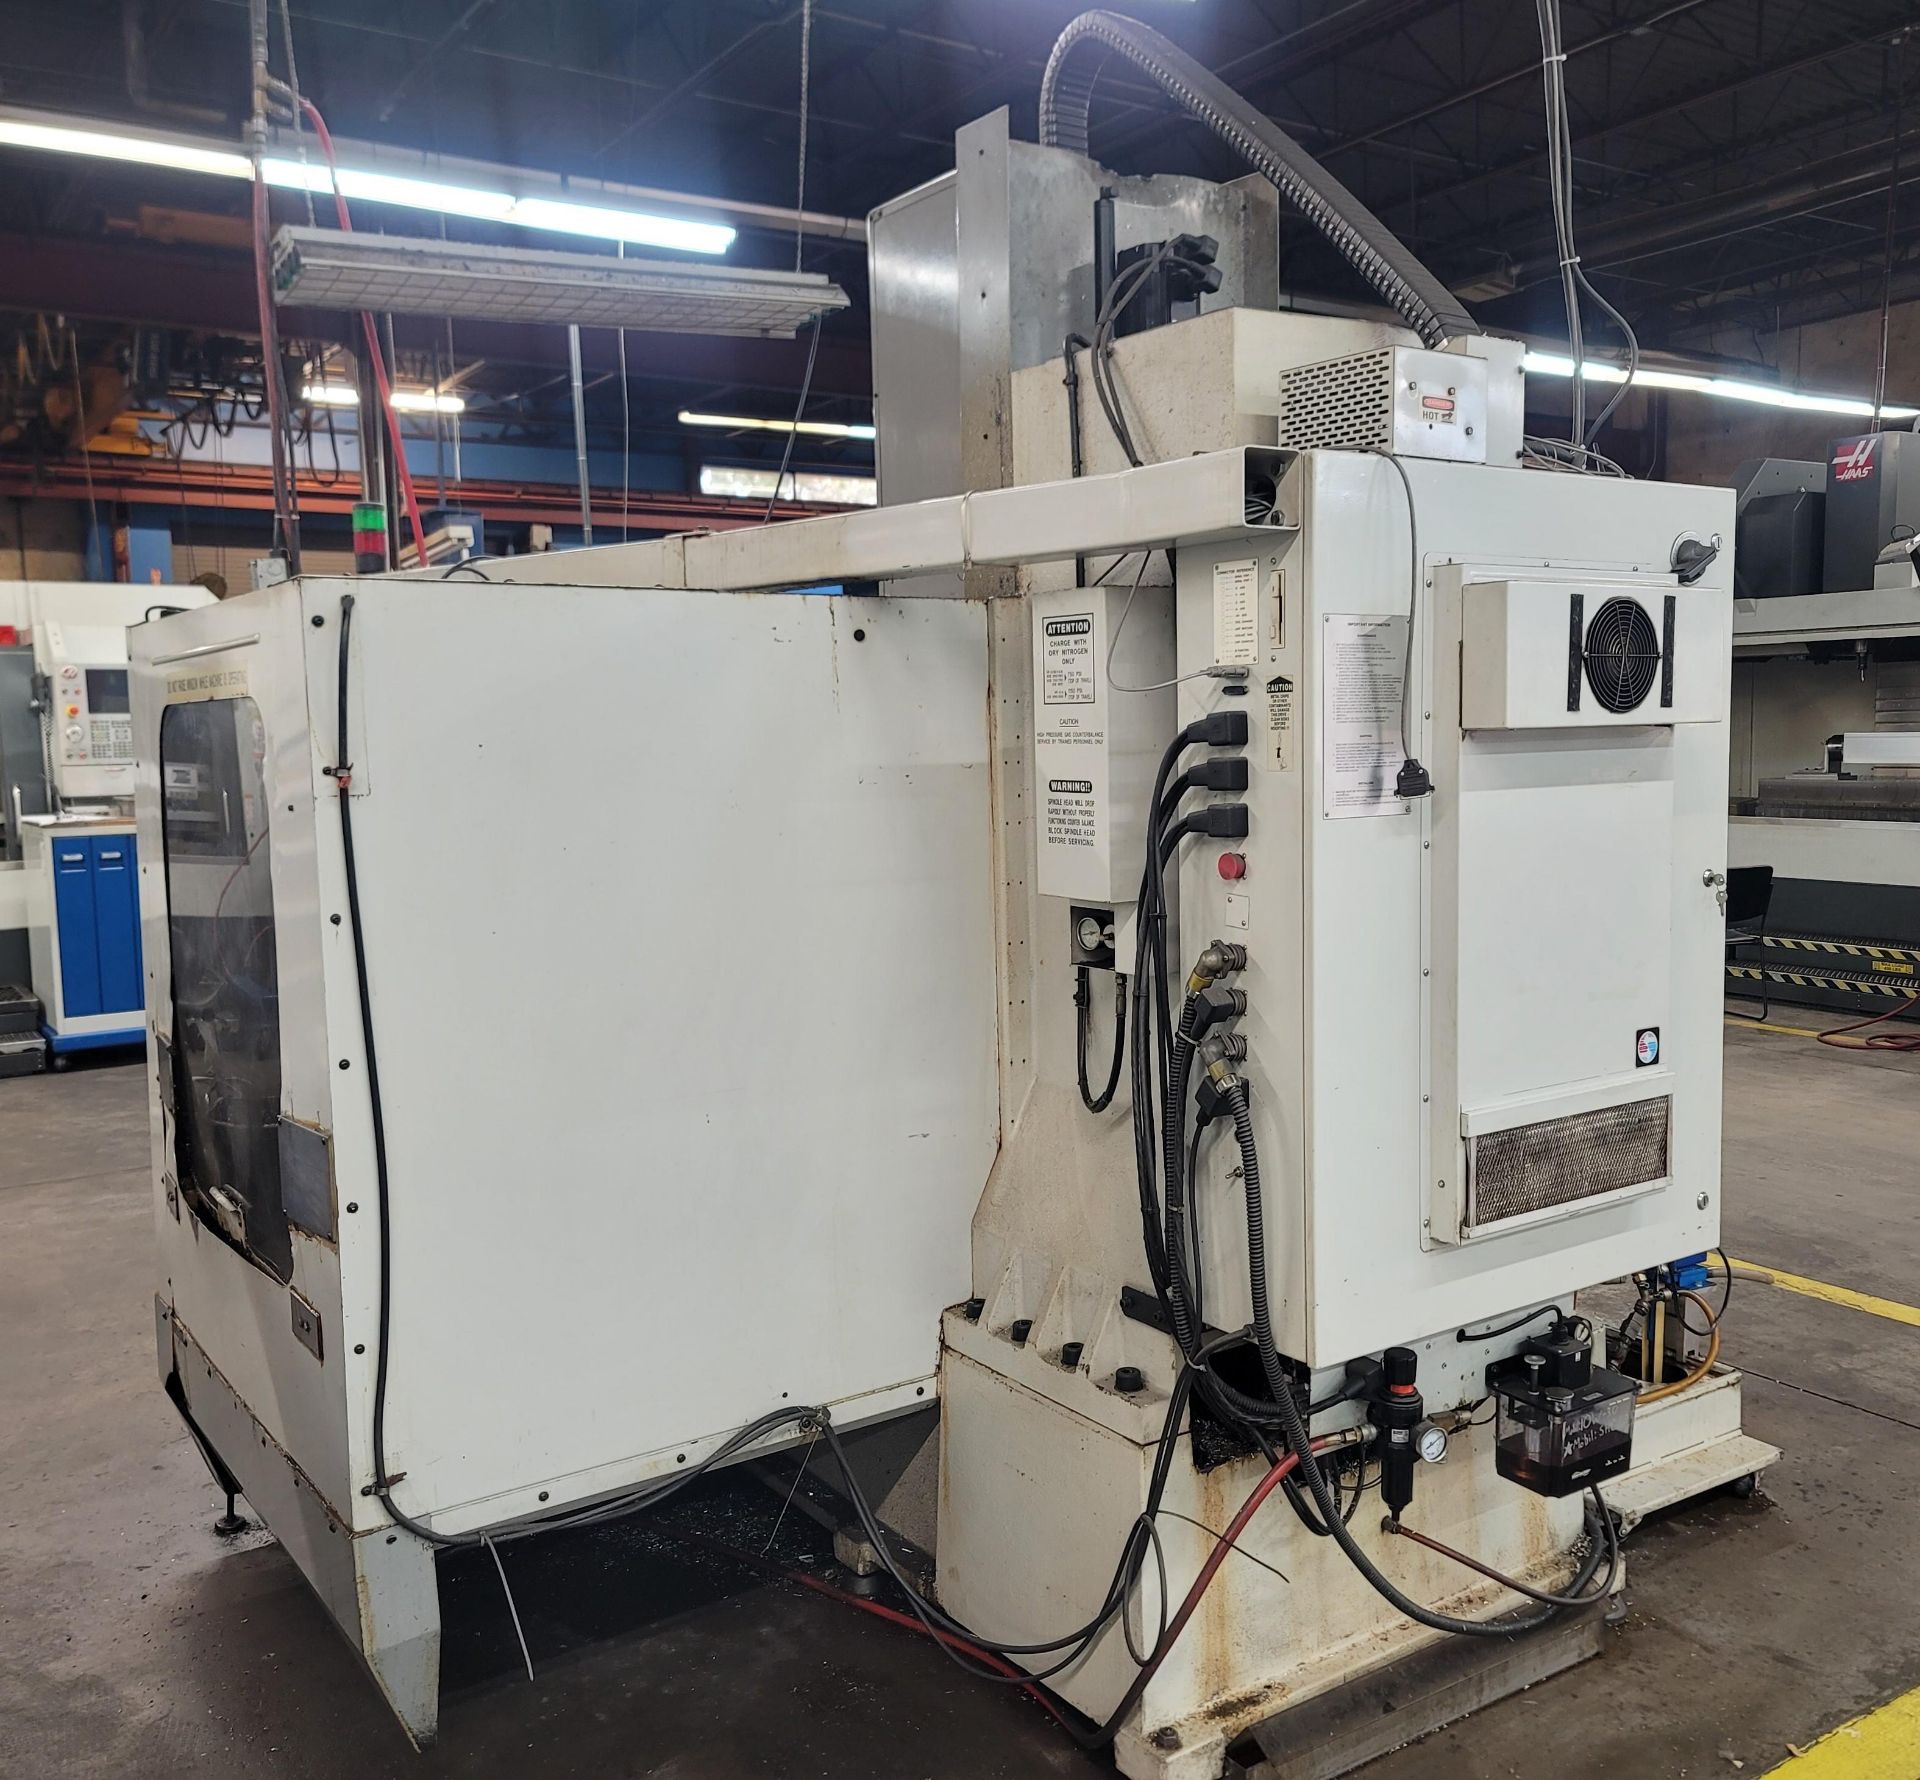 1996 HAAS VF-4 VERTICAL MACHINING CENTER, XYZ TRAVELS: 50" X 20" X 25", TABLE 52" X 18", 7500 RPM, - Image 3 of 12